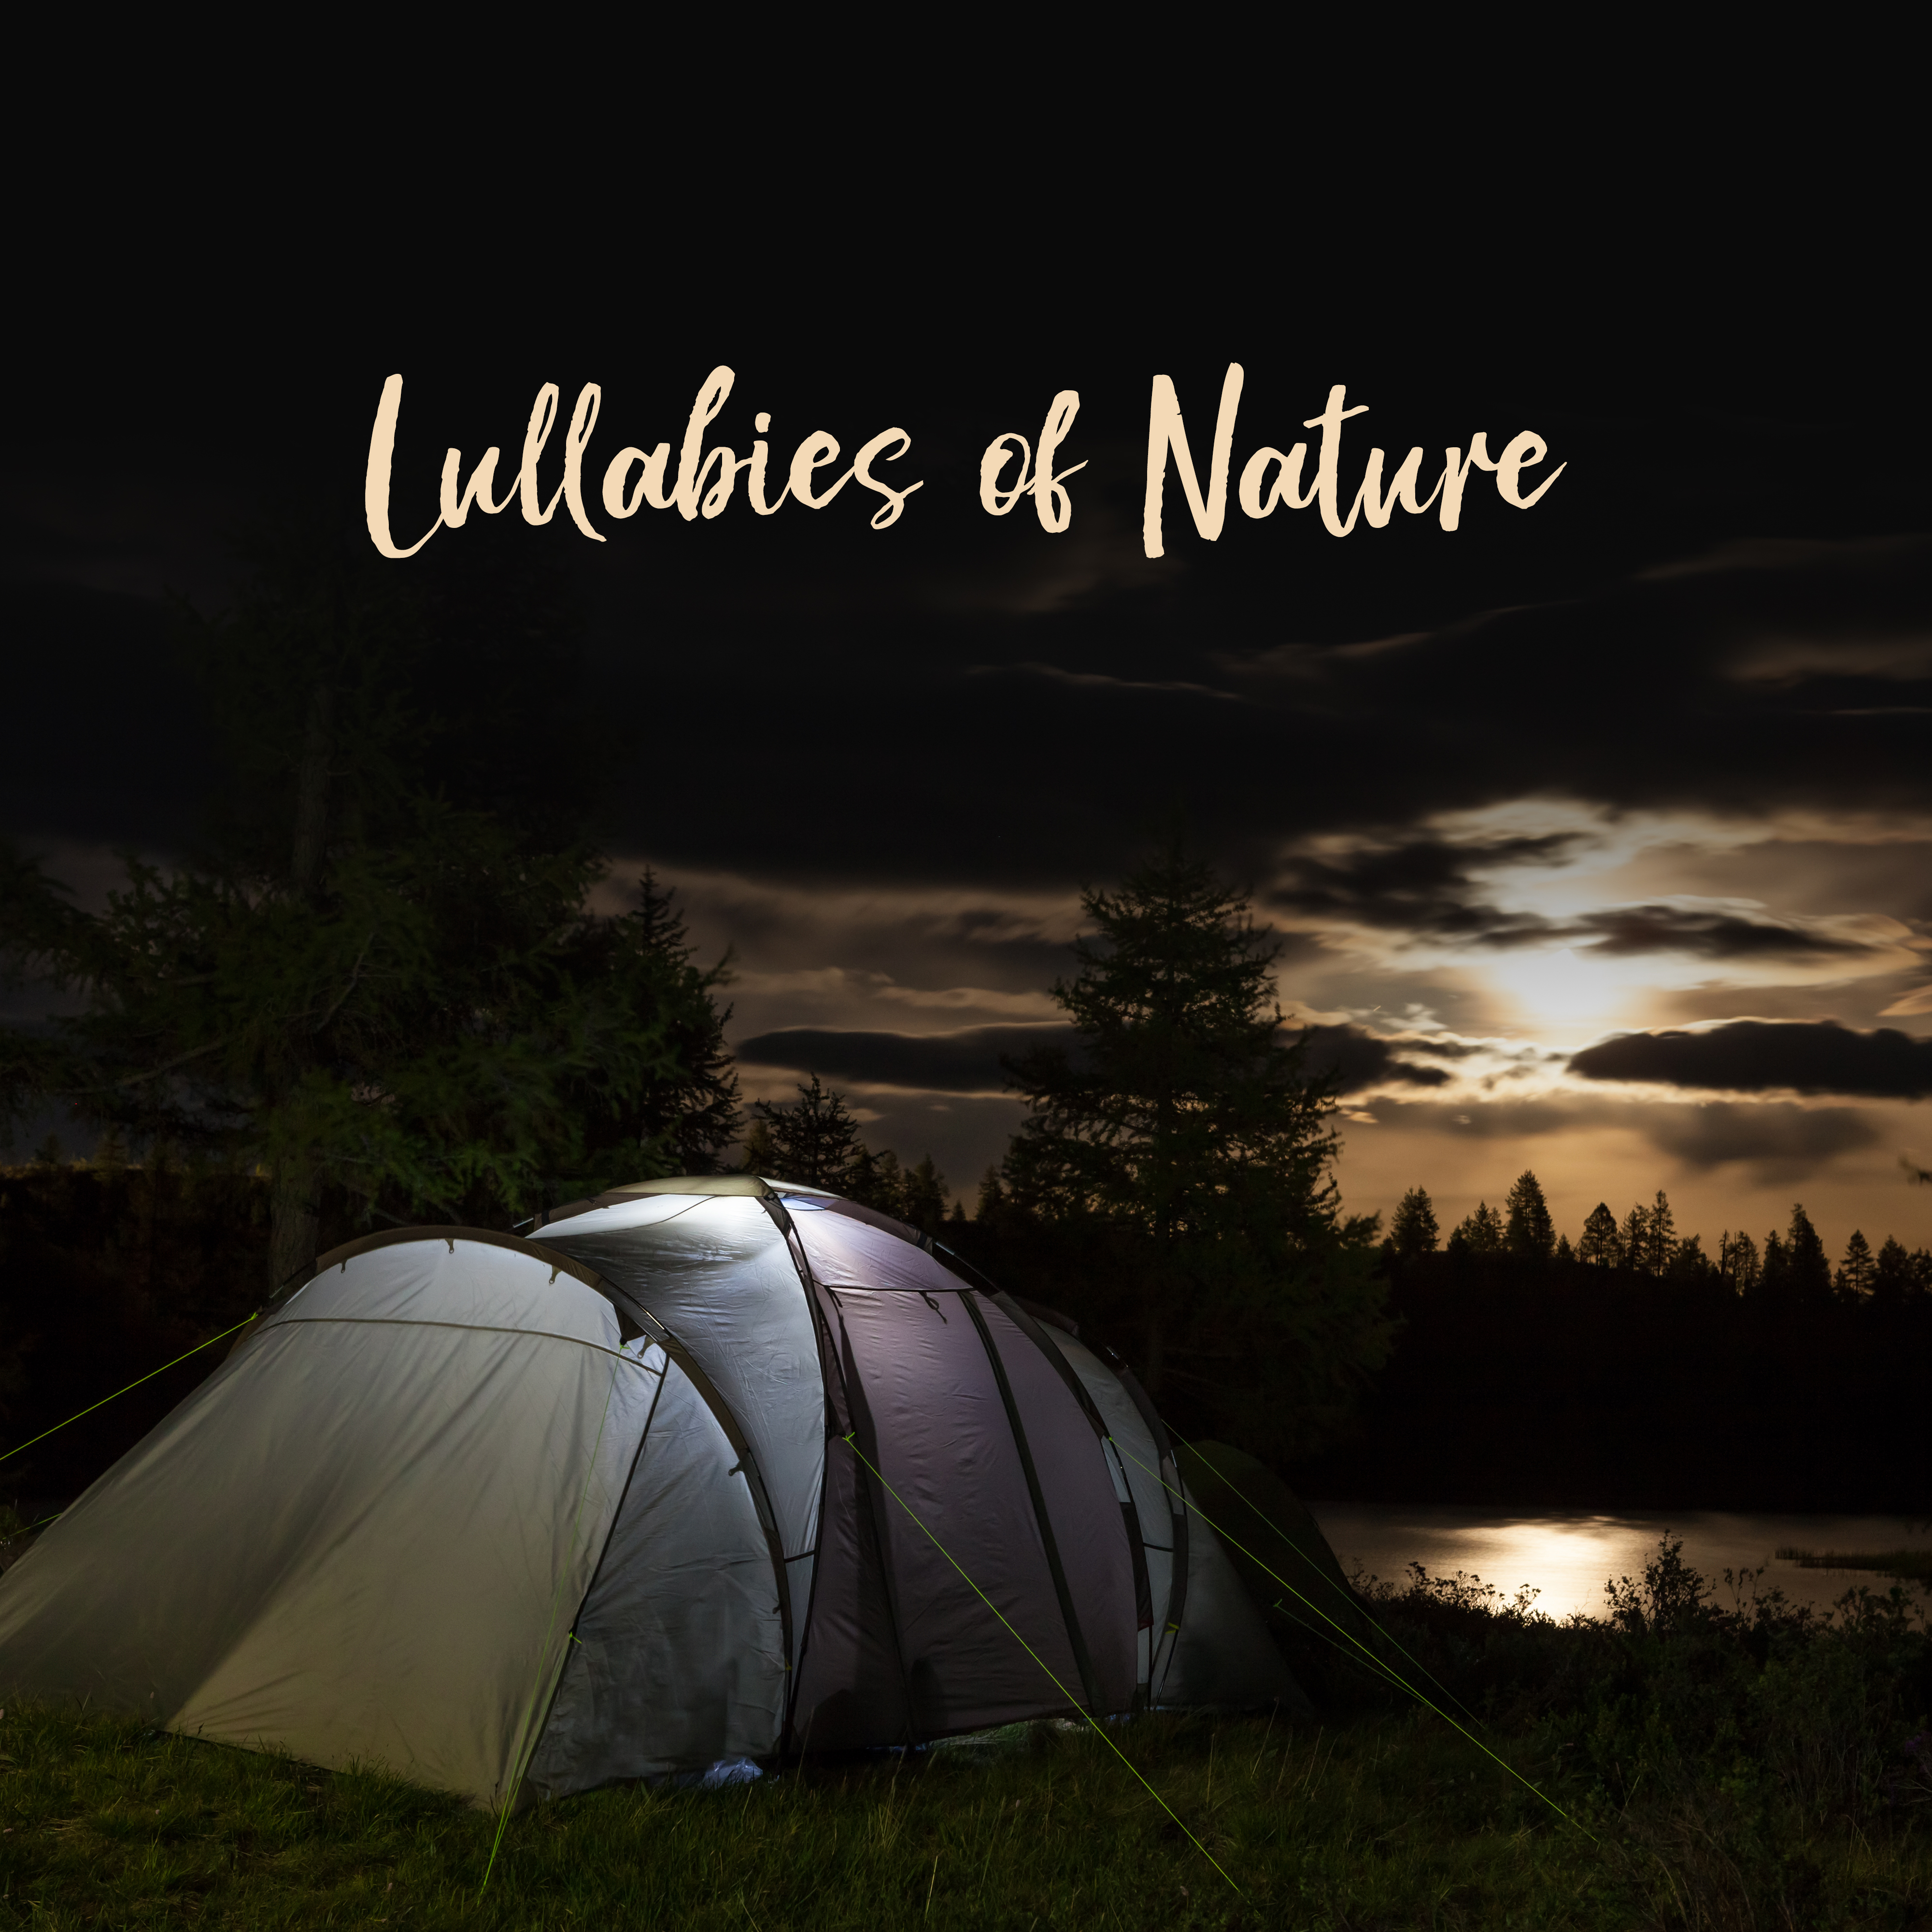 Lullabies of Nature: 15 Gentle and Calm Melodies to Bed, Help to Fall Into a Deep Sleep, Take a Quick Nap or Relax and Rest